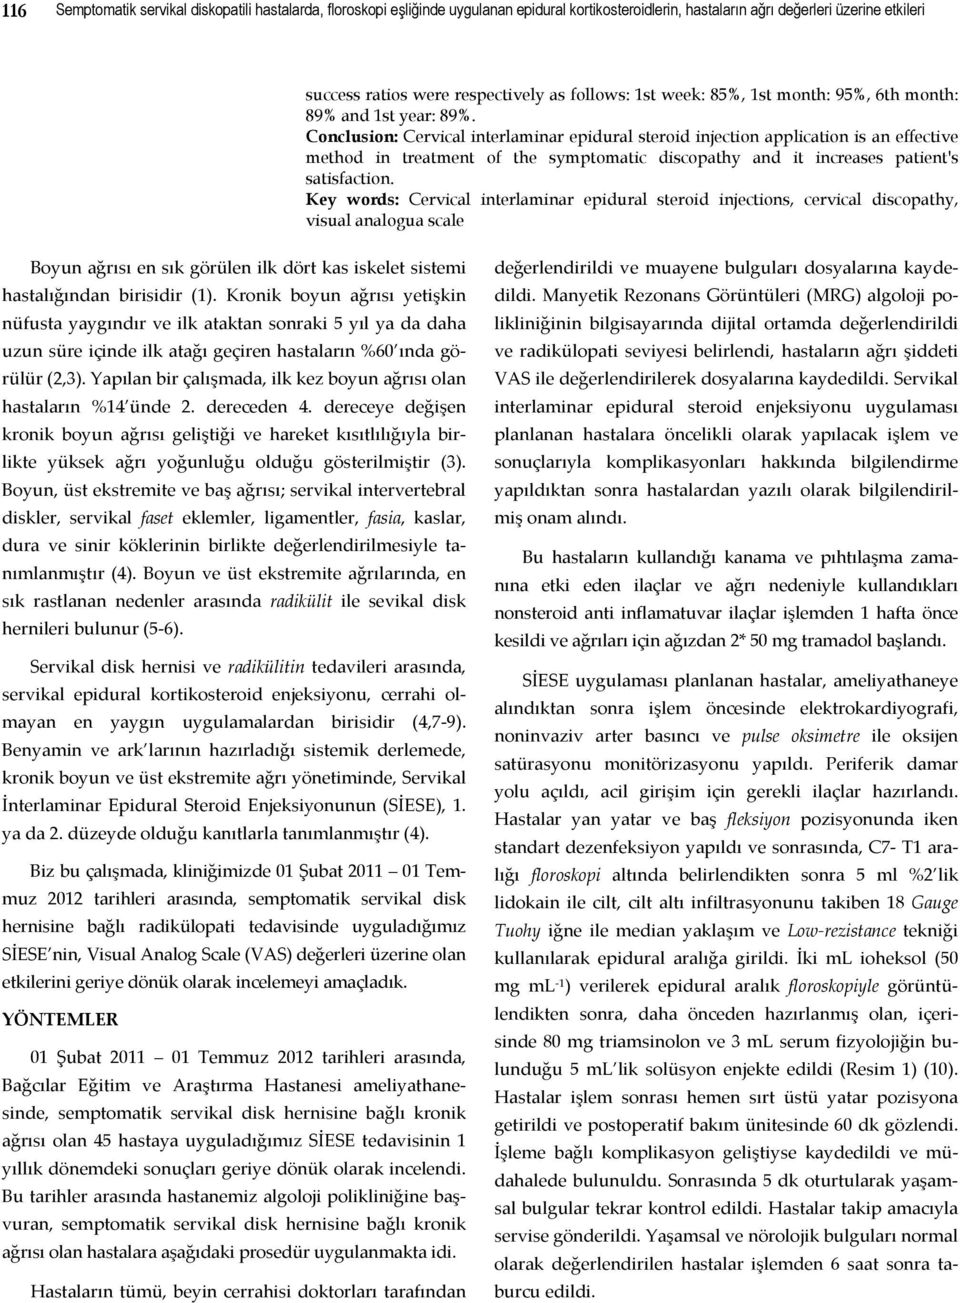 Conclusion: Cervical interlaminar epidural steroid injection application is an effective method in treatment of the symptomatic discopathy and it increases patient's satisfaction.